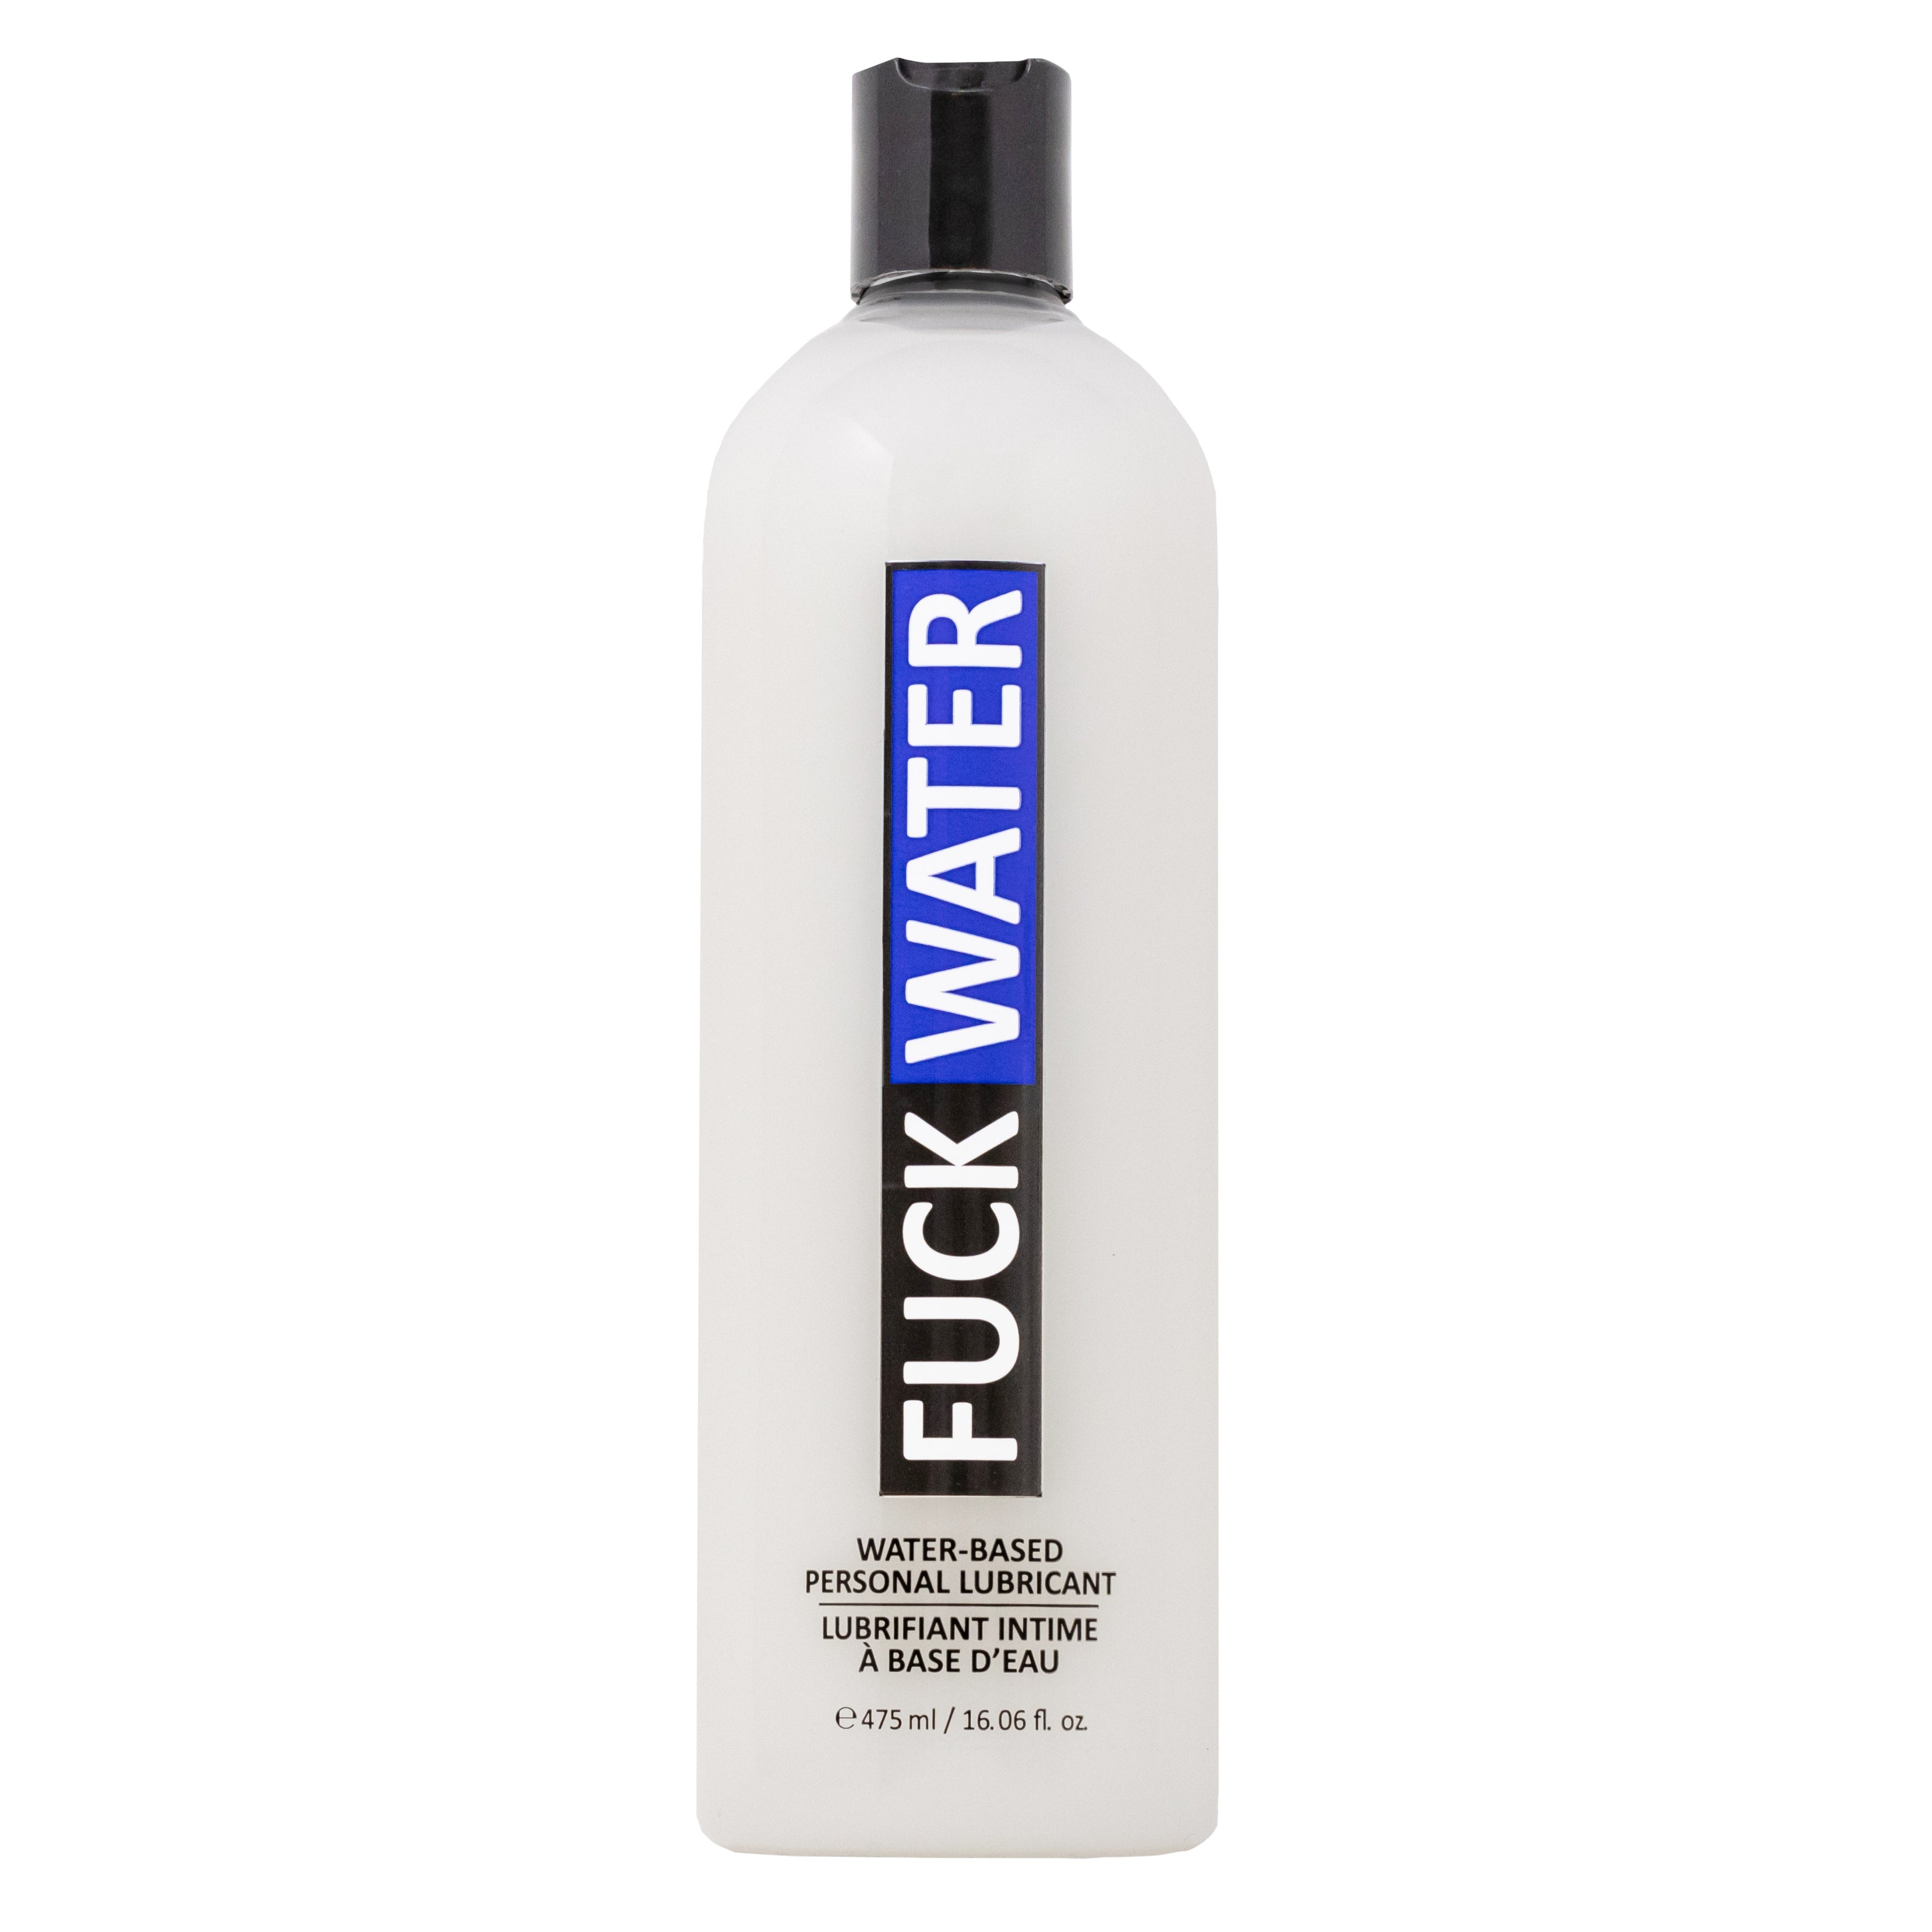 Fuck Water 16.06oz Water Based Personal Lubricant Fuck Water